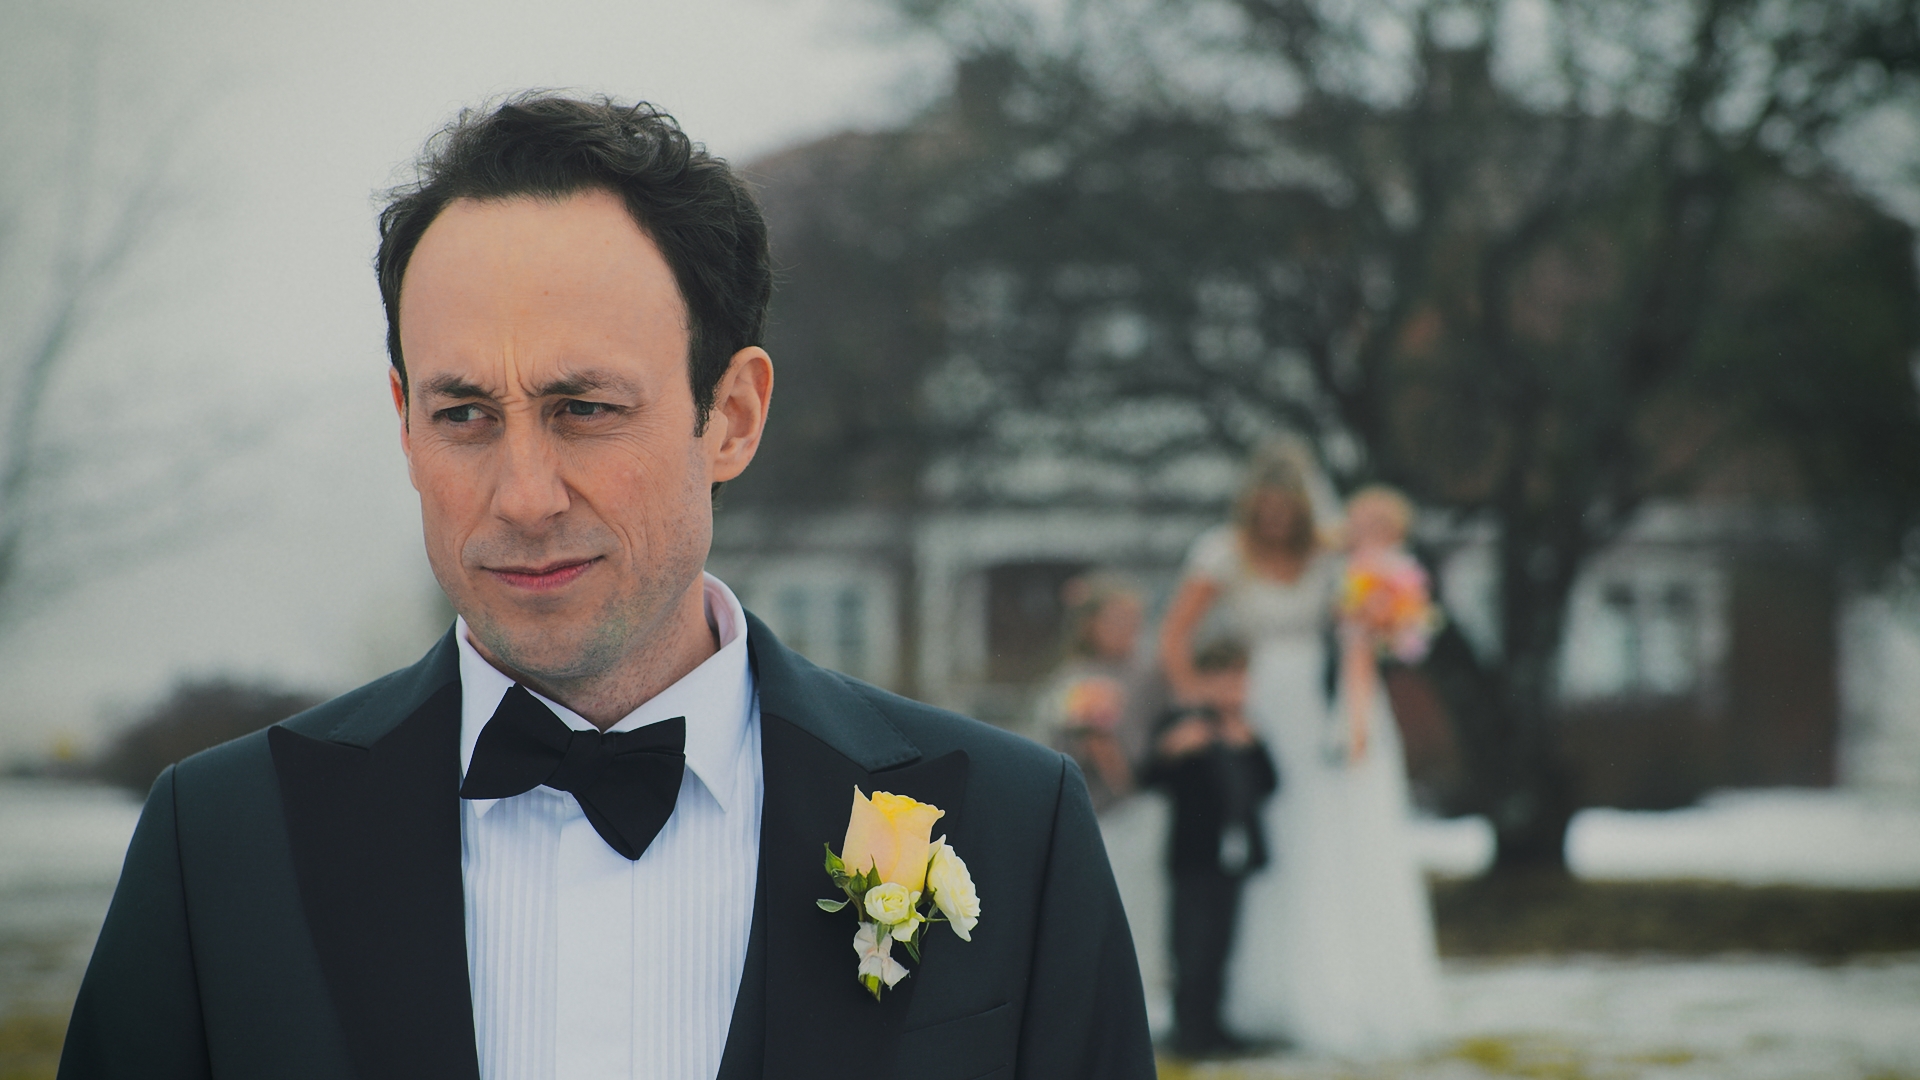 cinematic american wedding color grading and shot matching by freelance video DI colorist vipandeep singh